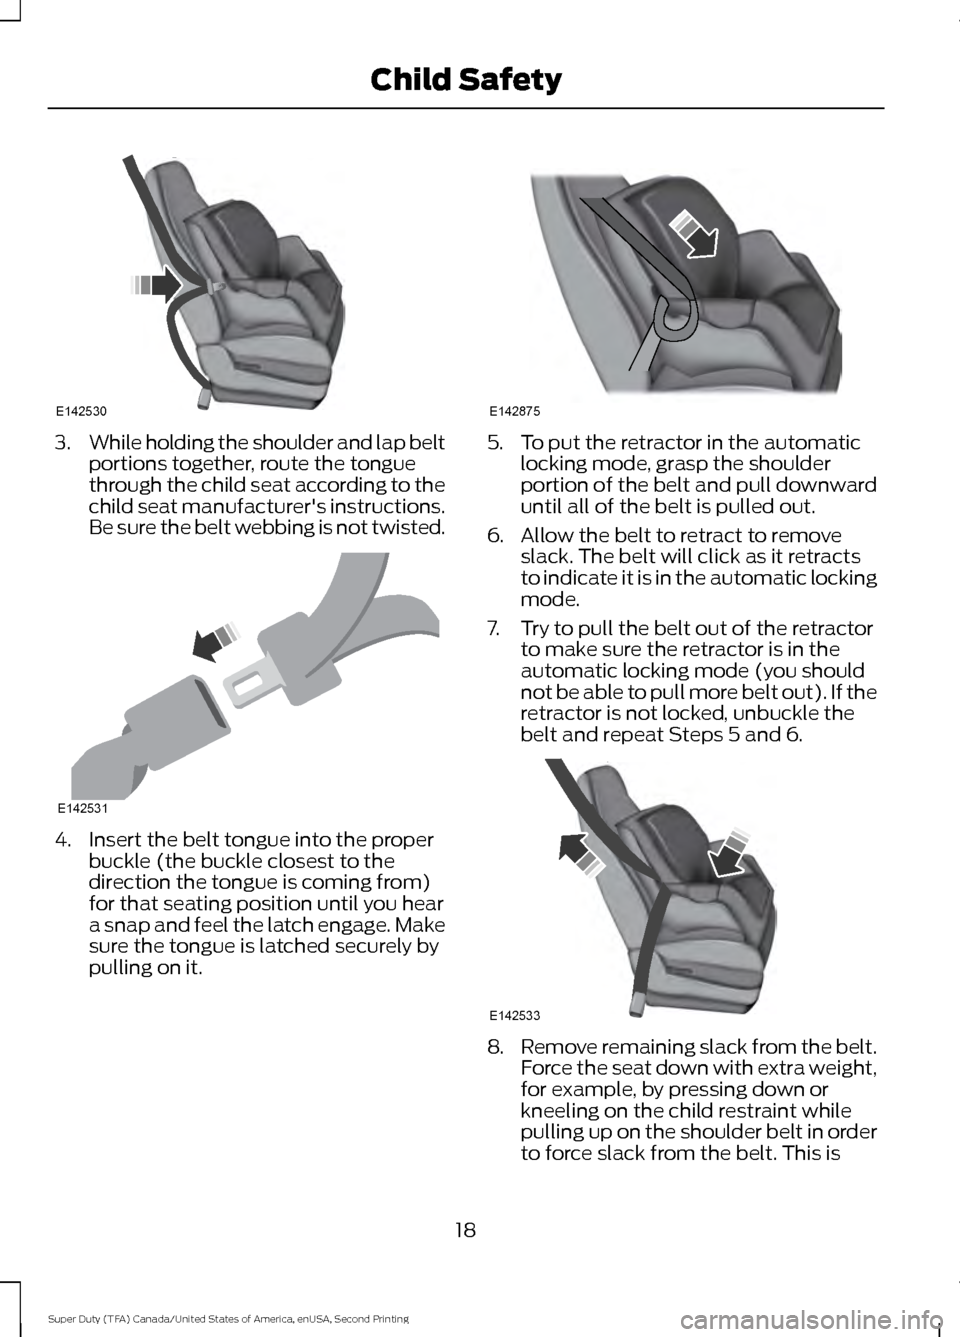 FORD SUPER DUTY 2016 3.G Owners Manual 3.
While holding the shoulder and lap belt
portions together, route the tongue
through the child seat according to the
child seat manufacturers instructions.
Be sure the belt webbing is not twisted. 